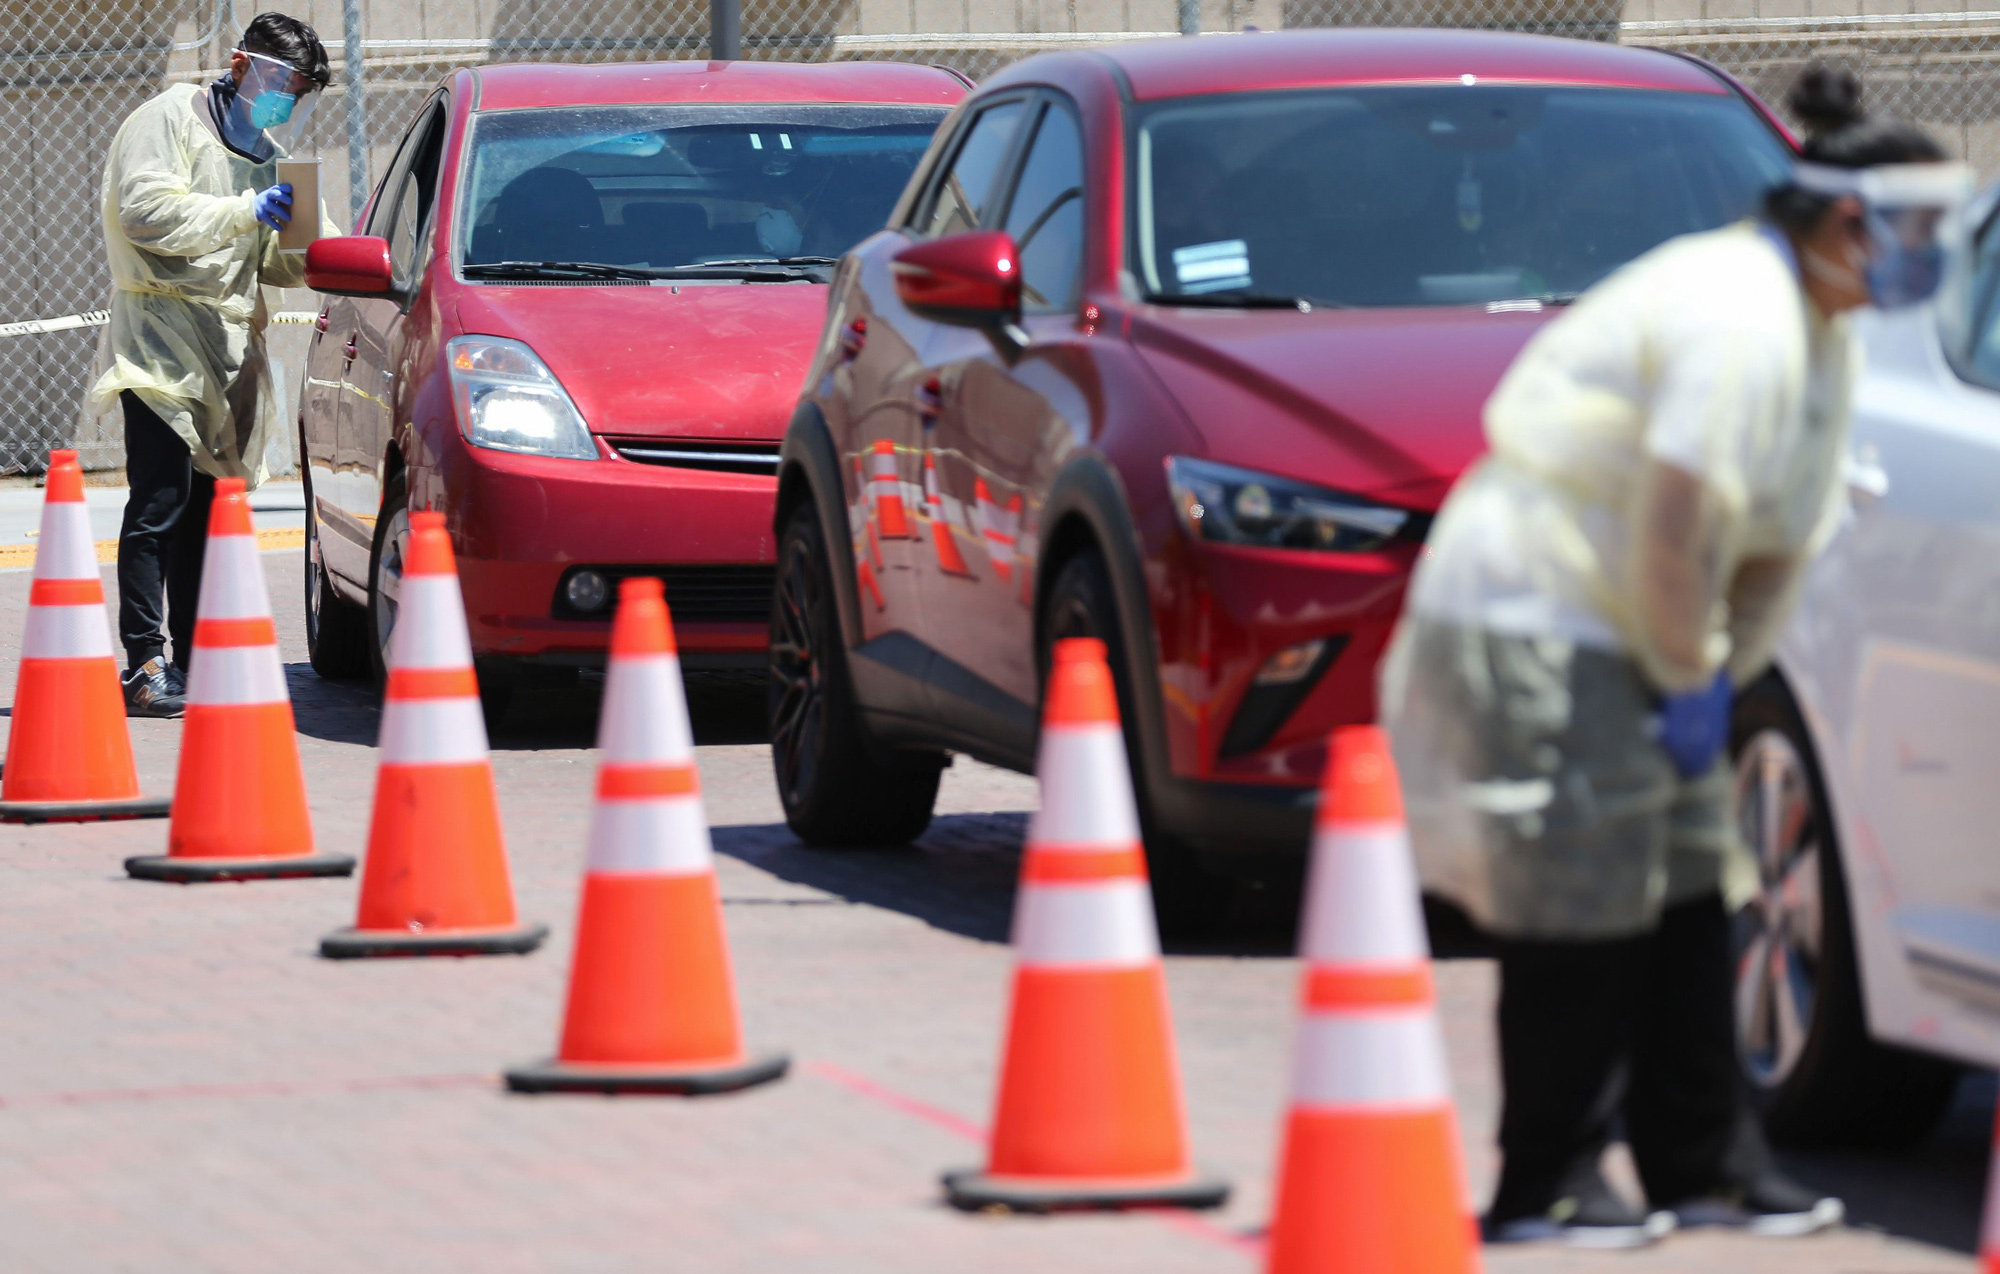 Vehicles line up at a drive-in COVID-19 testing center at Charles R. Drew University of Medicine and Science on July 31 in Los Angeles.